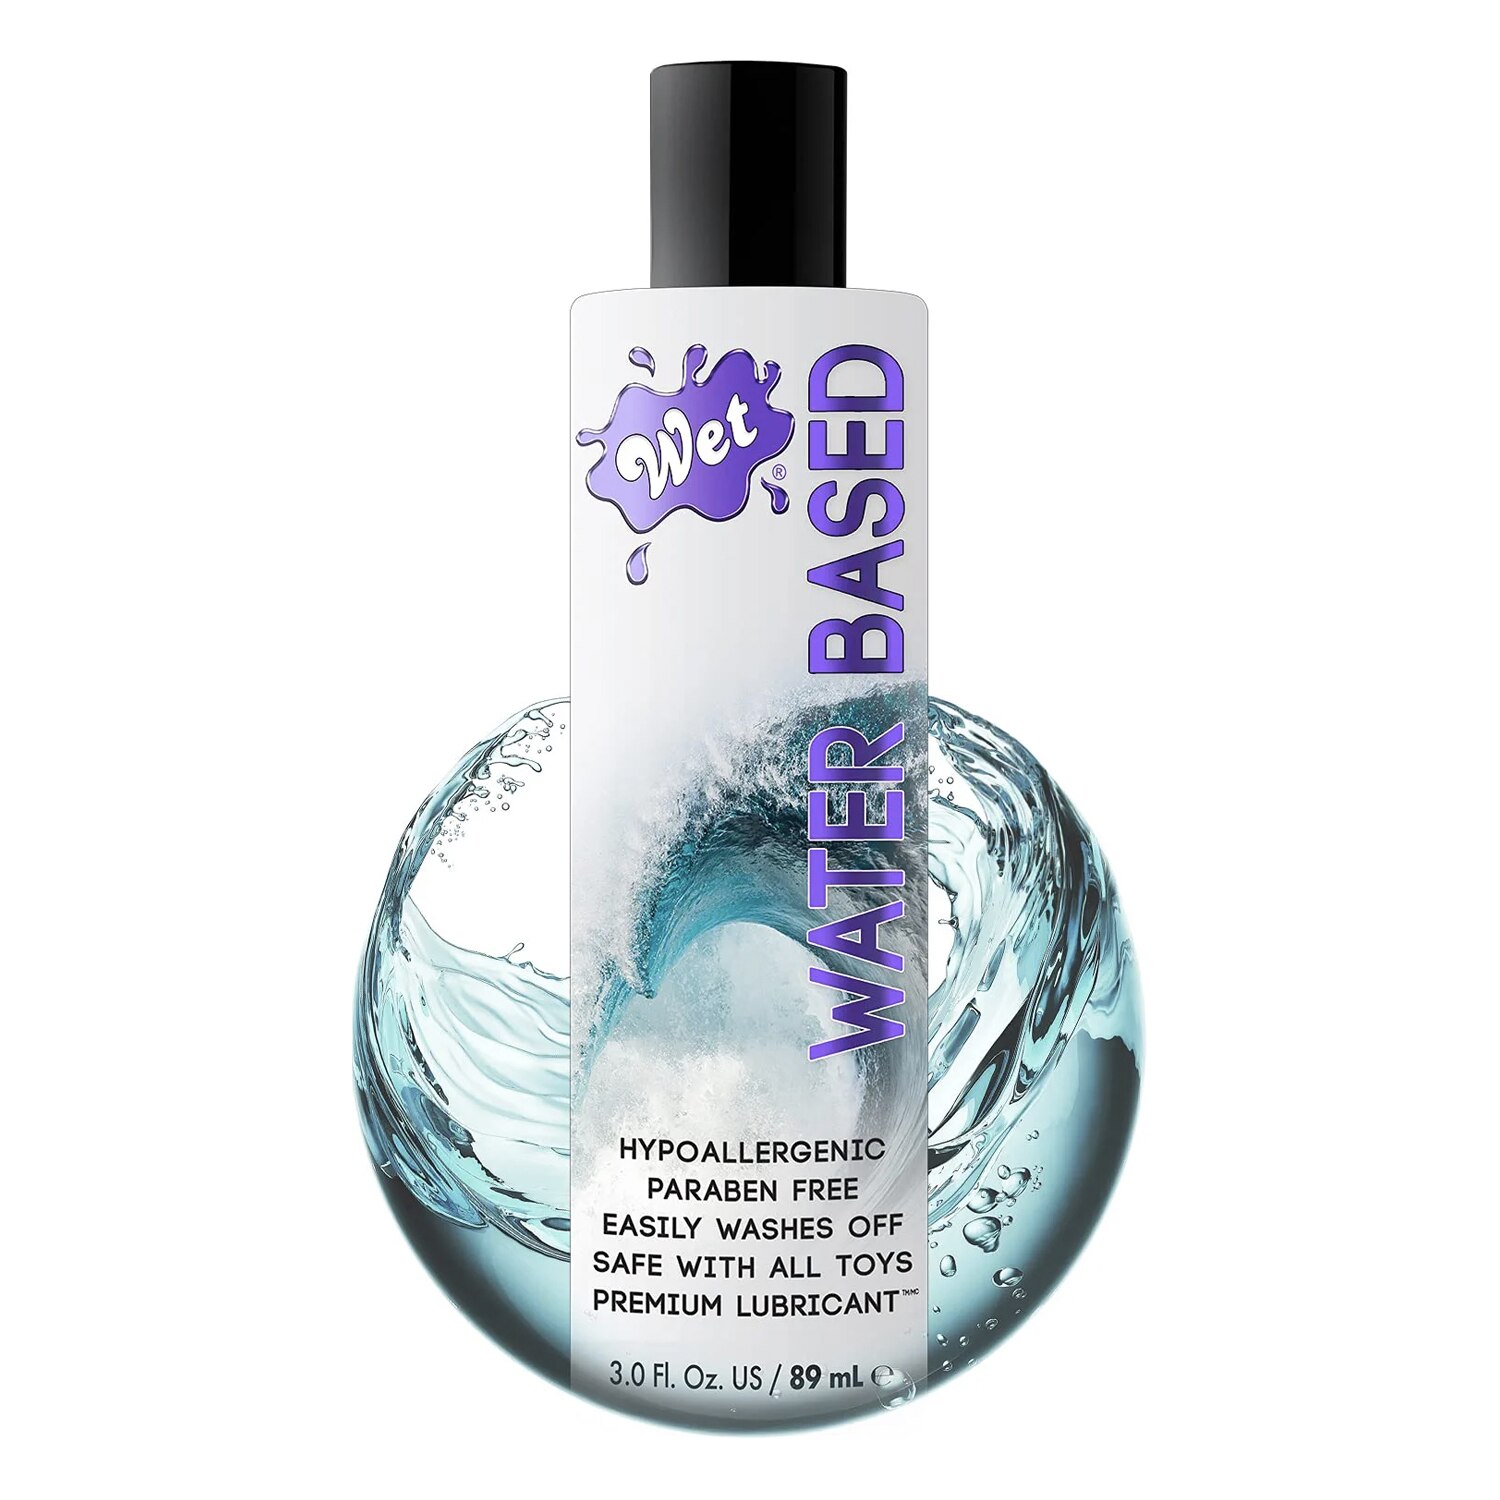 Wet Water Based Premium Personal Lubricant, 6.1 OZ